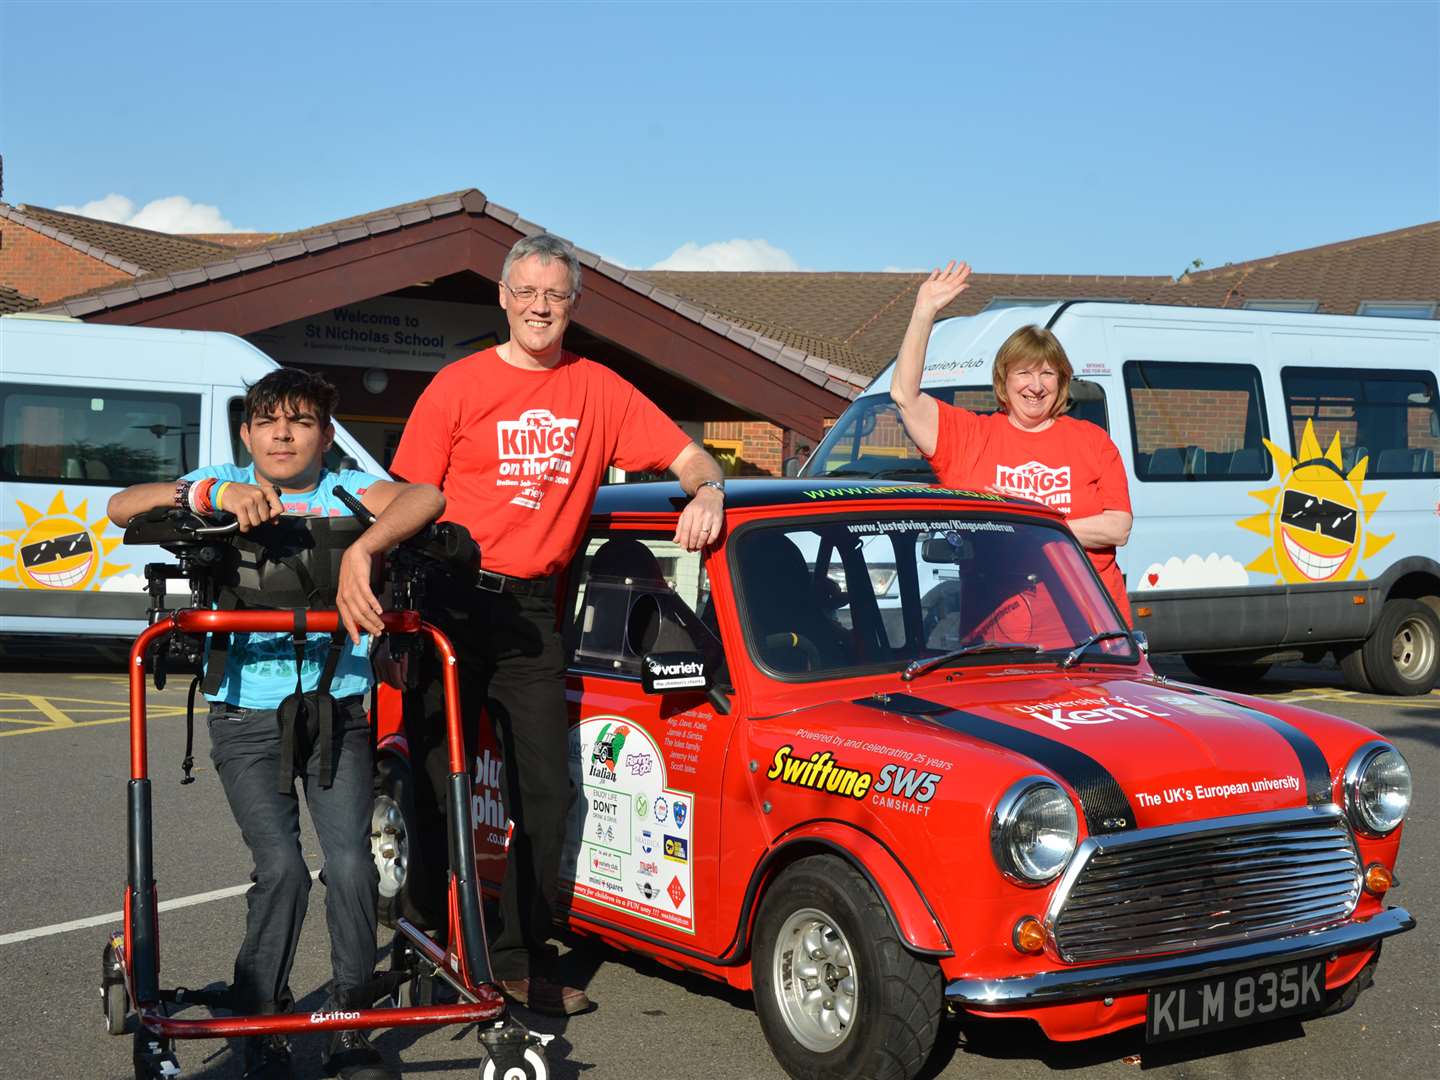 Stephen and Pat King are taking on the 2014 Italian Job car rally